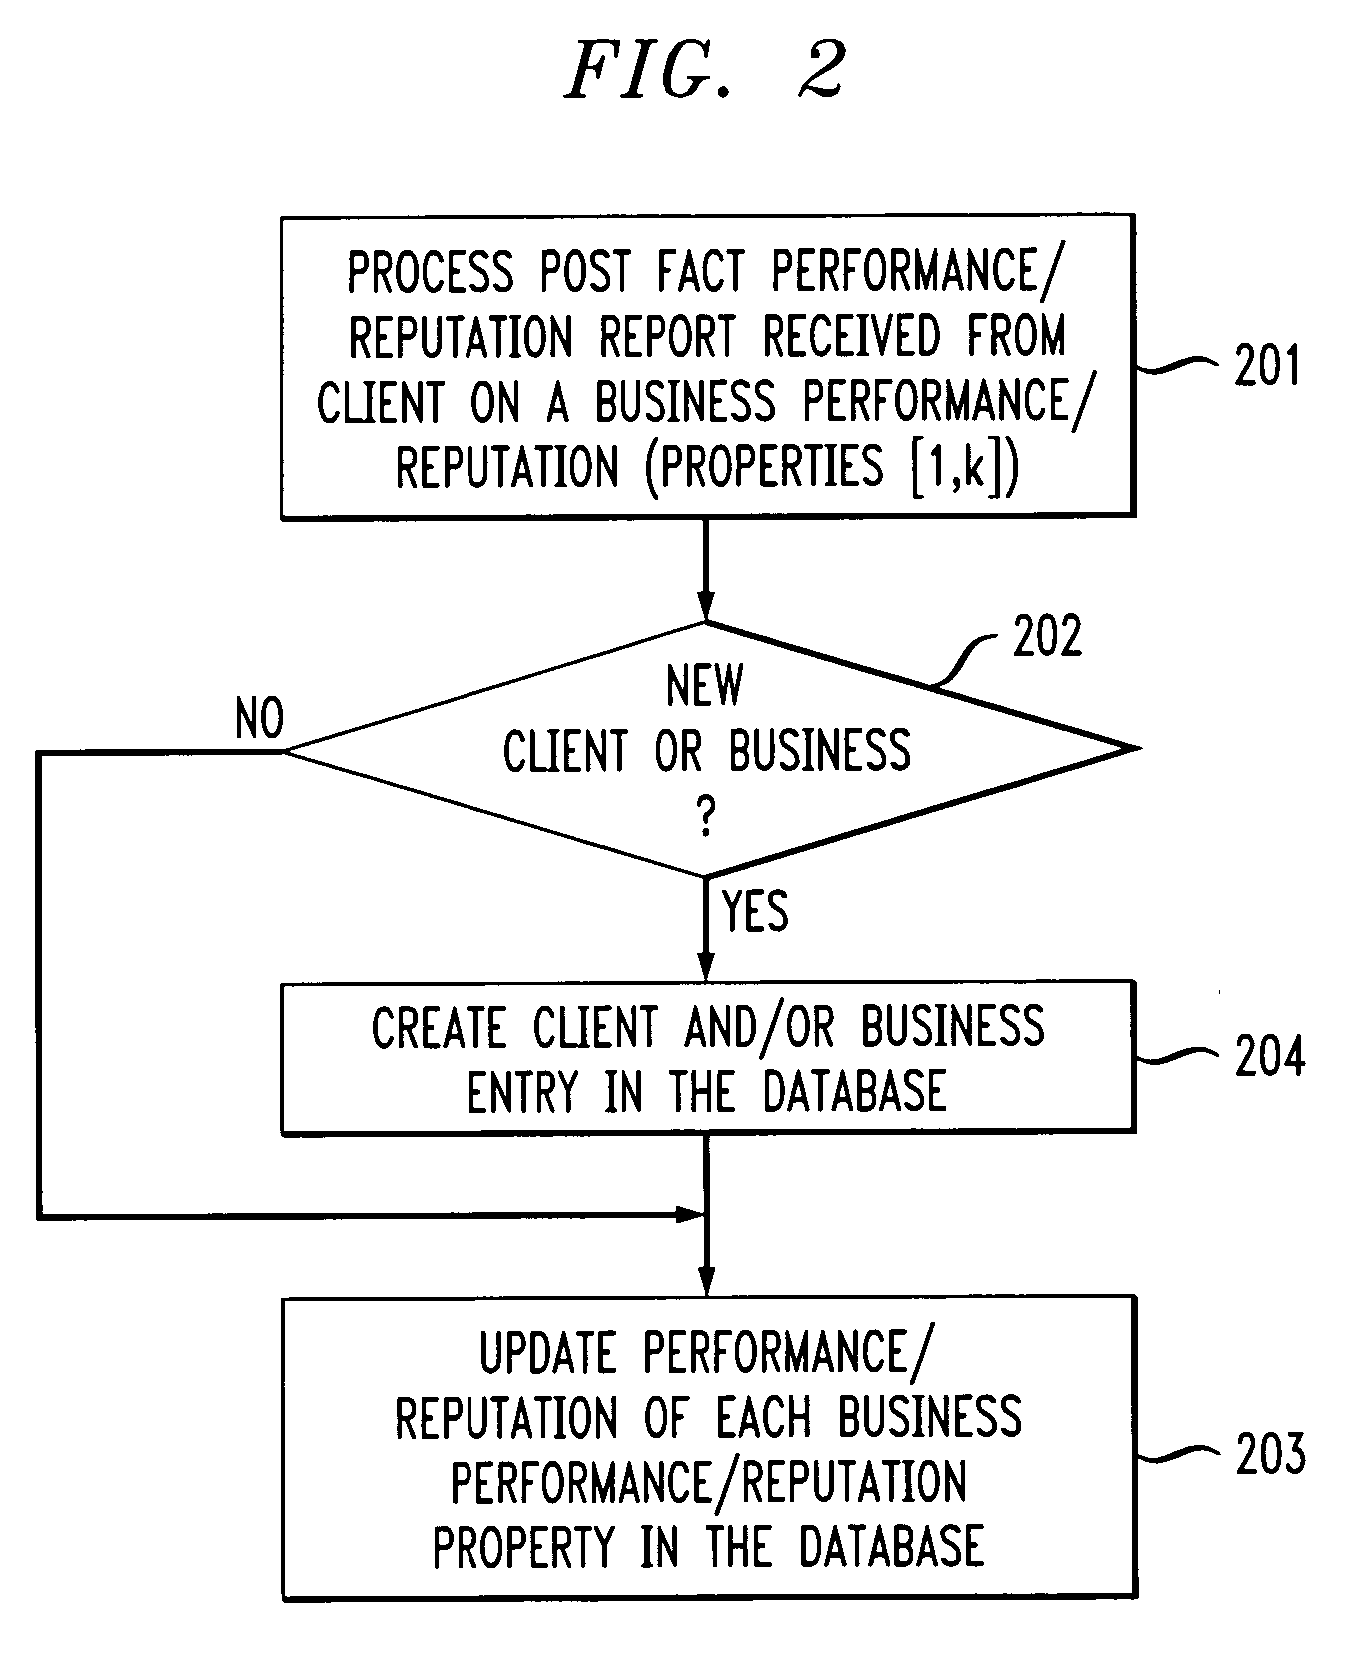 Performance prediction service using business-process information